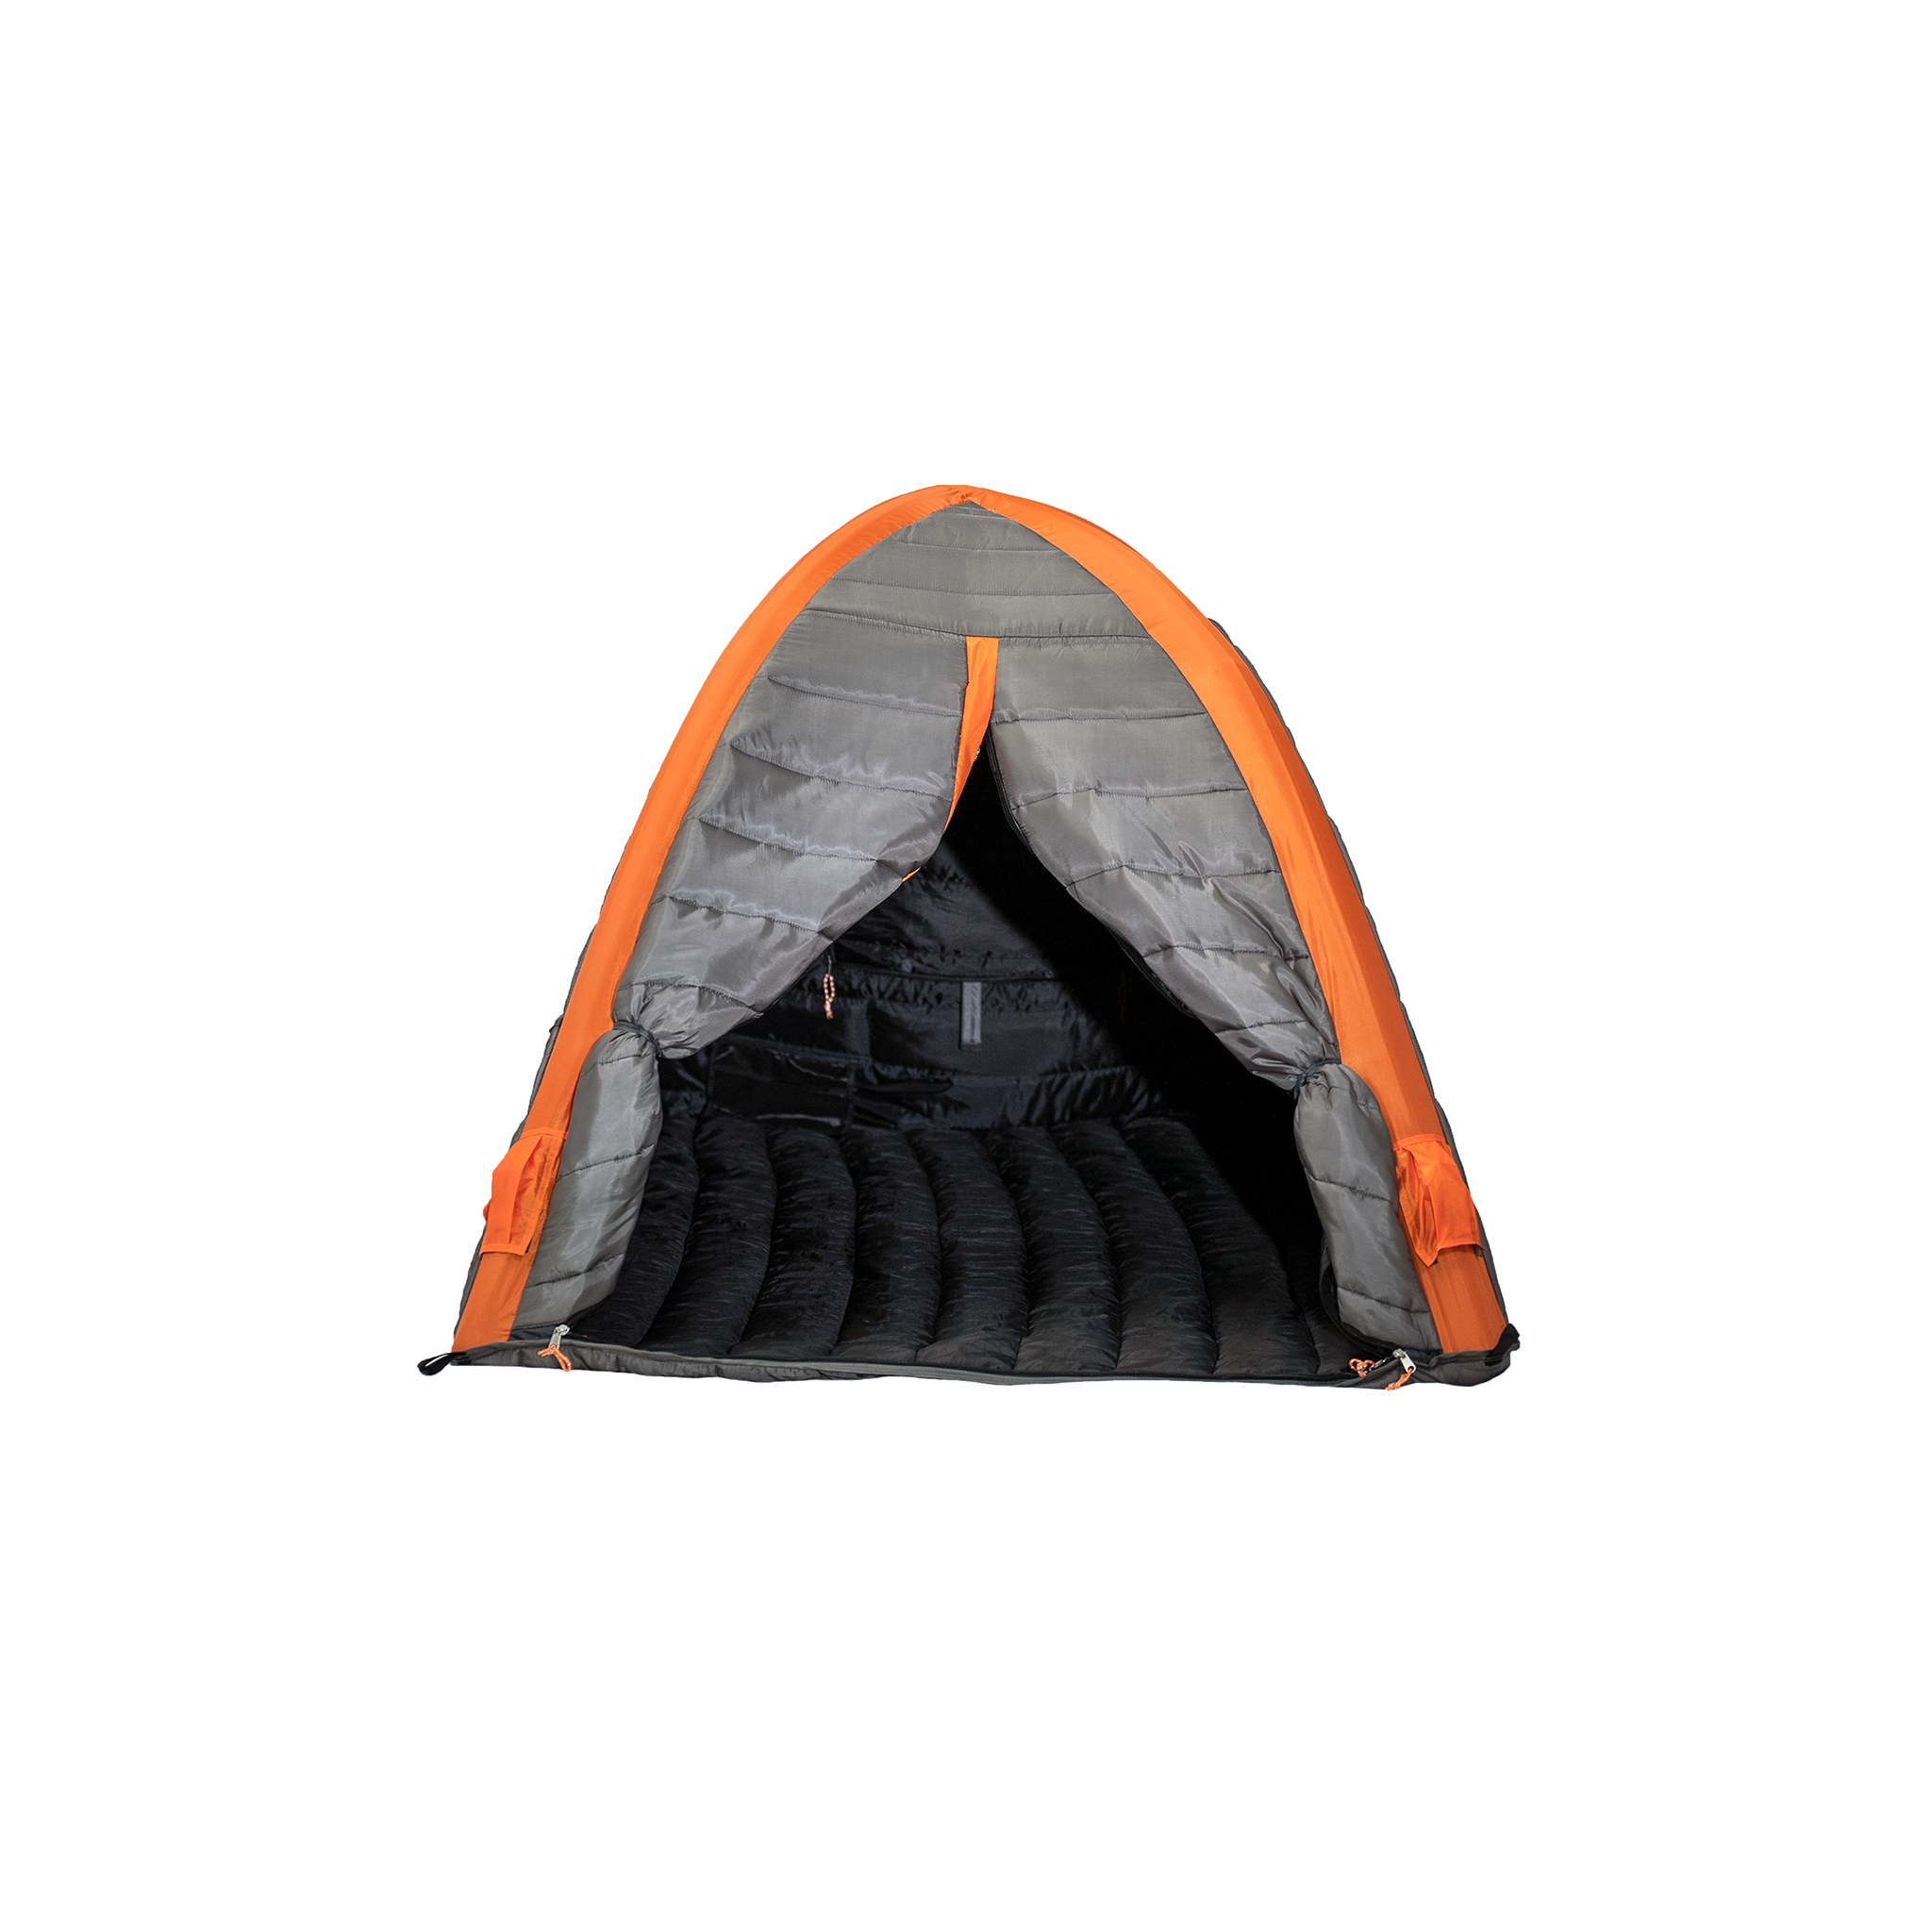 CRUA - Insulated Camping Tents & Quality Camping Gear